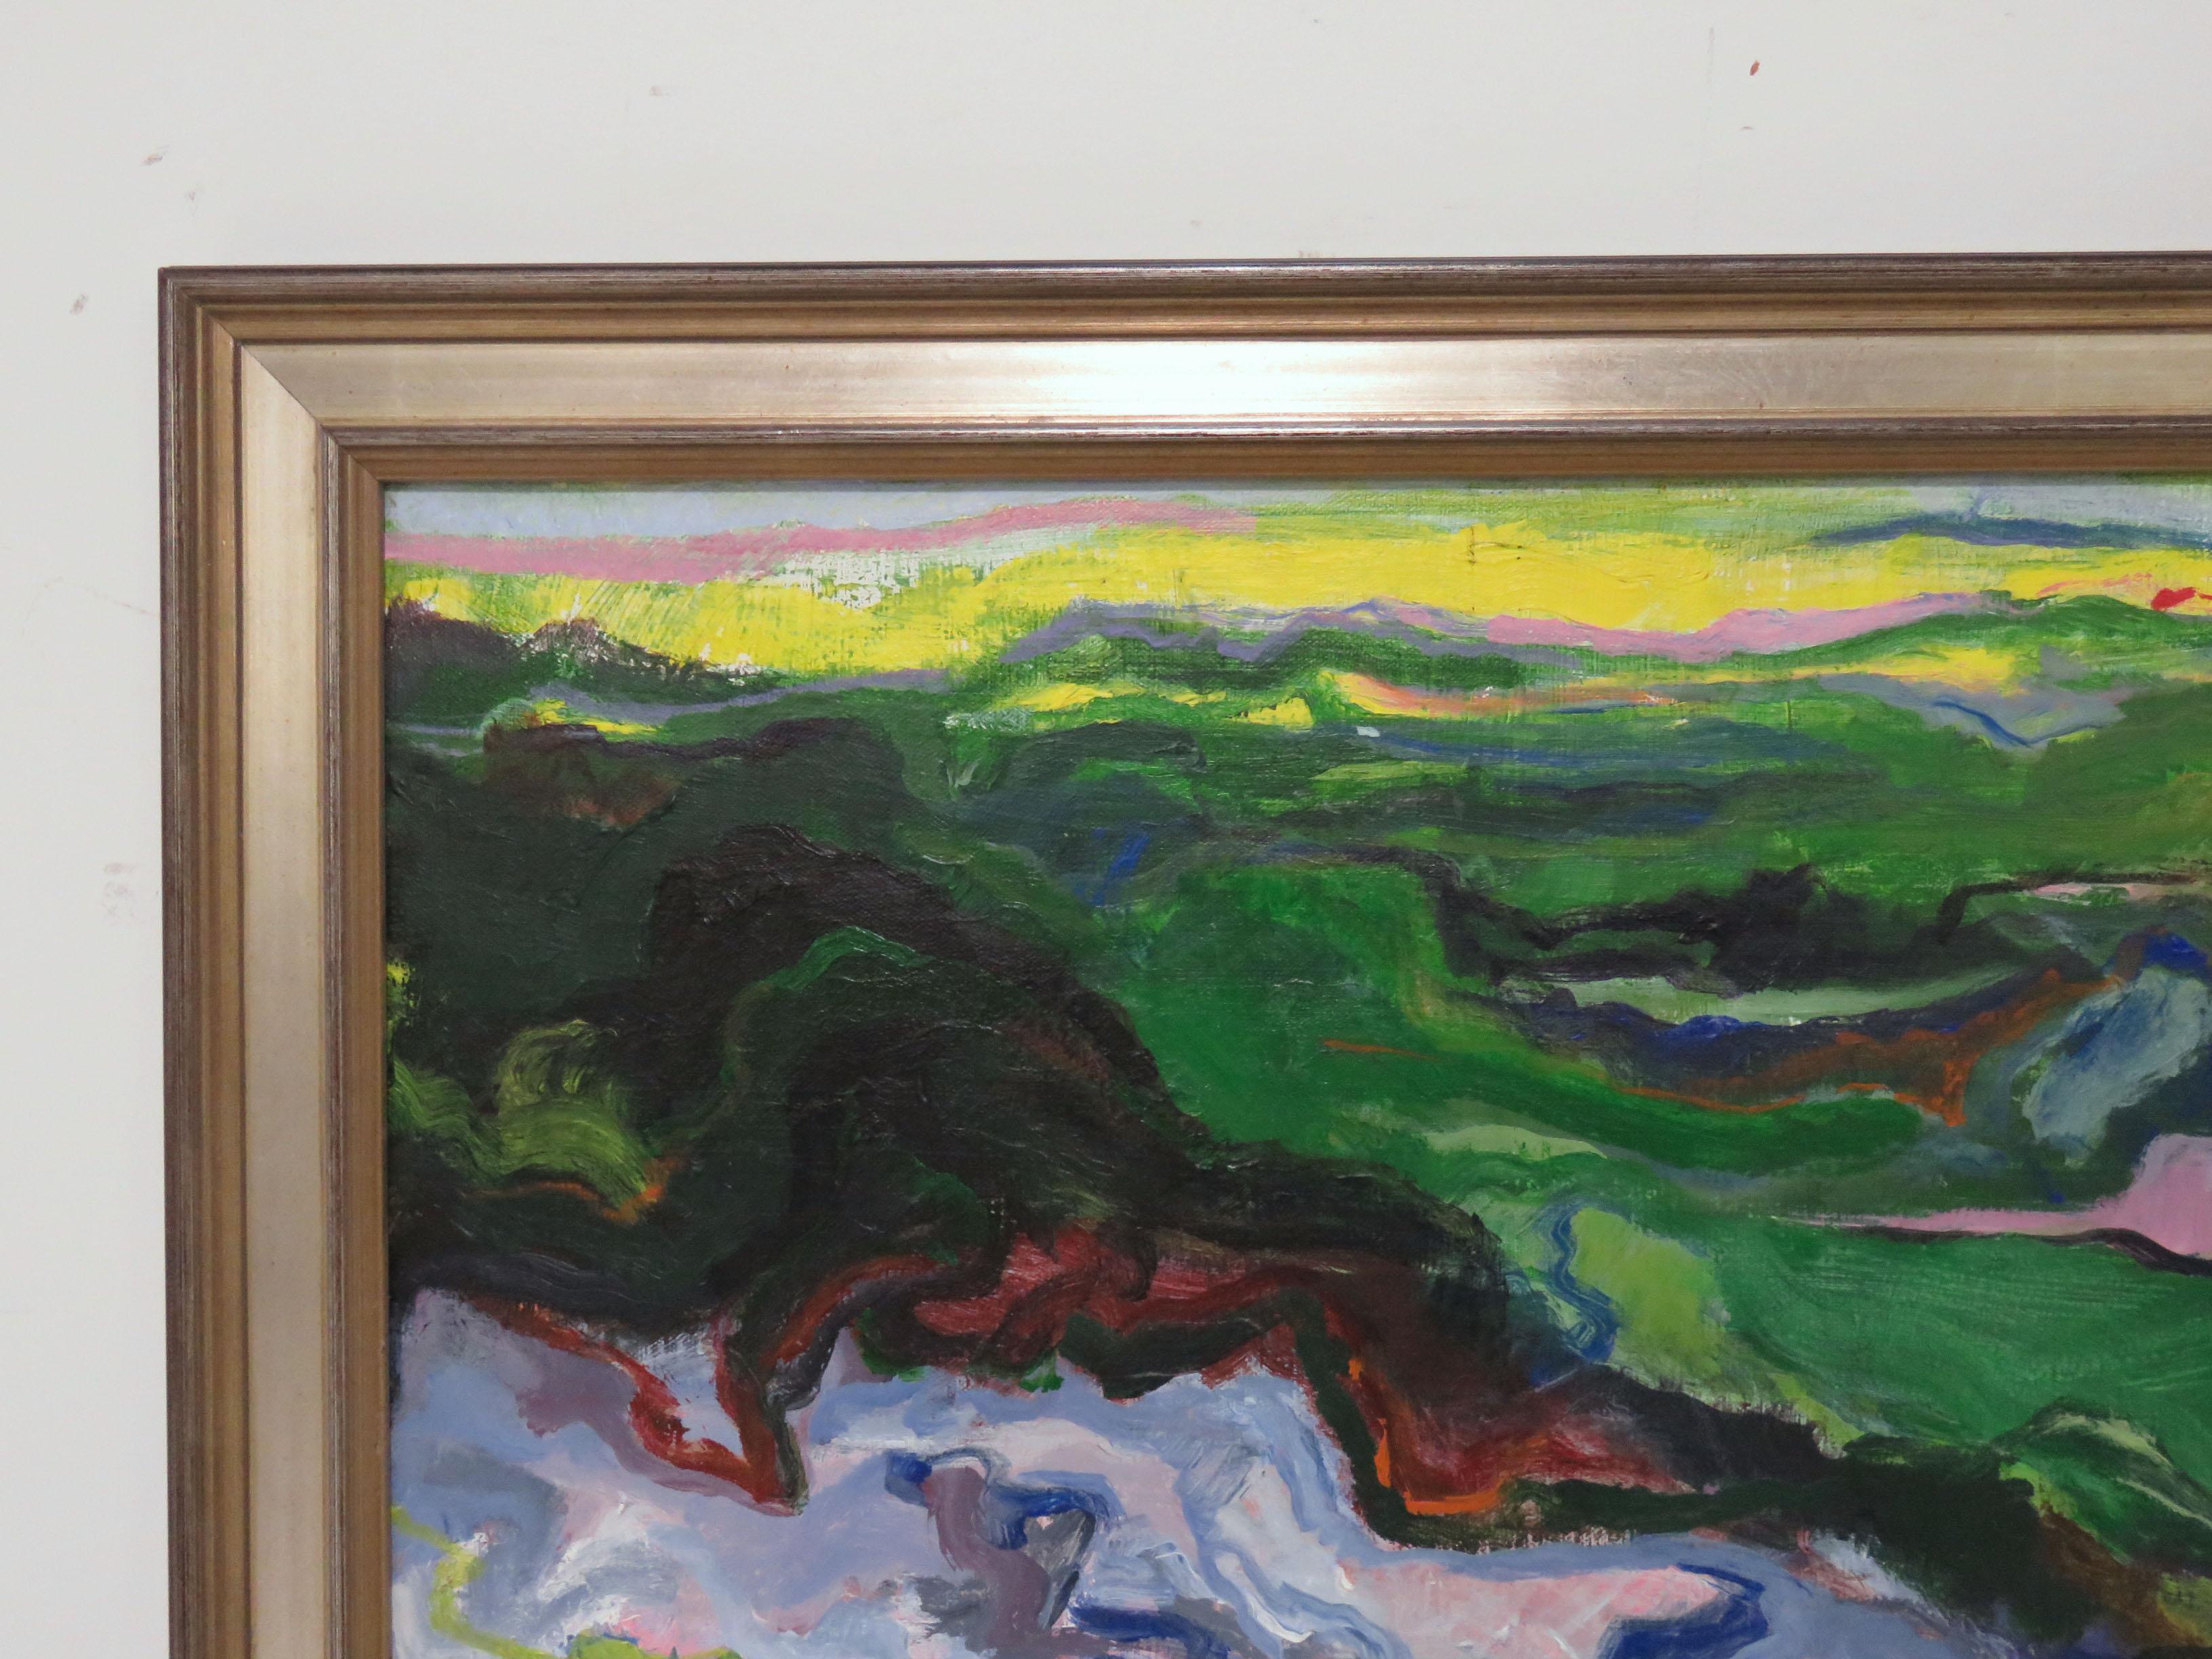 North American Modernist Abstract Landscape in the Fauvist Style, Signed and Dated 1974